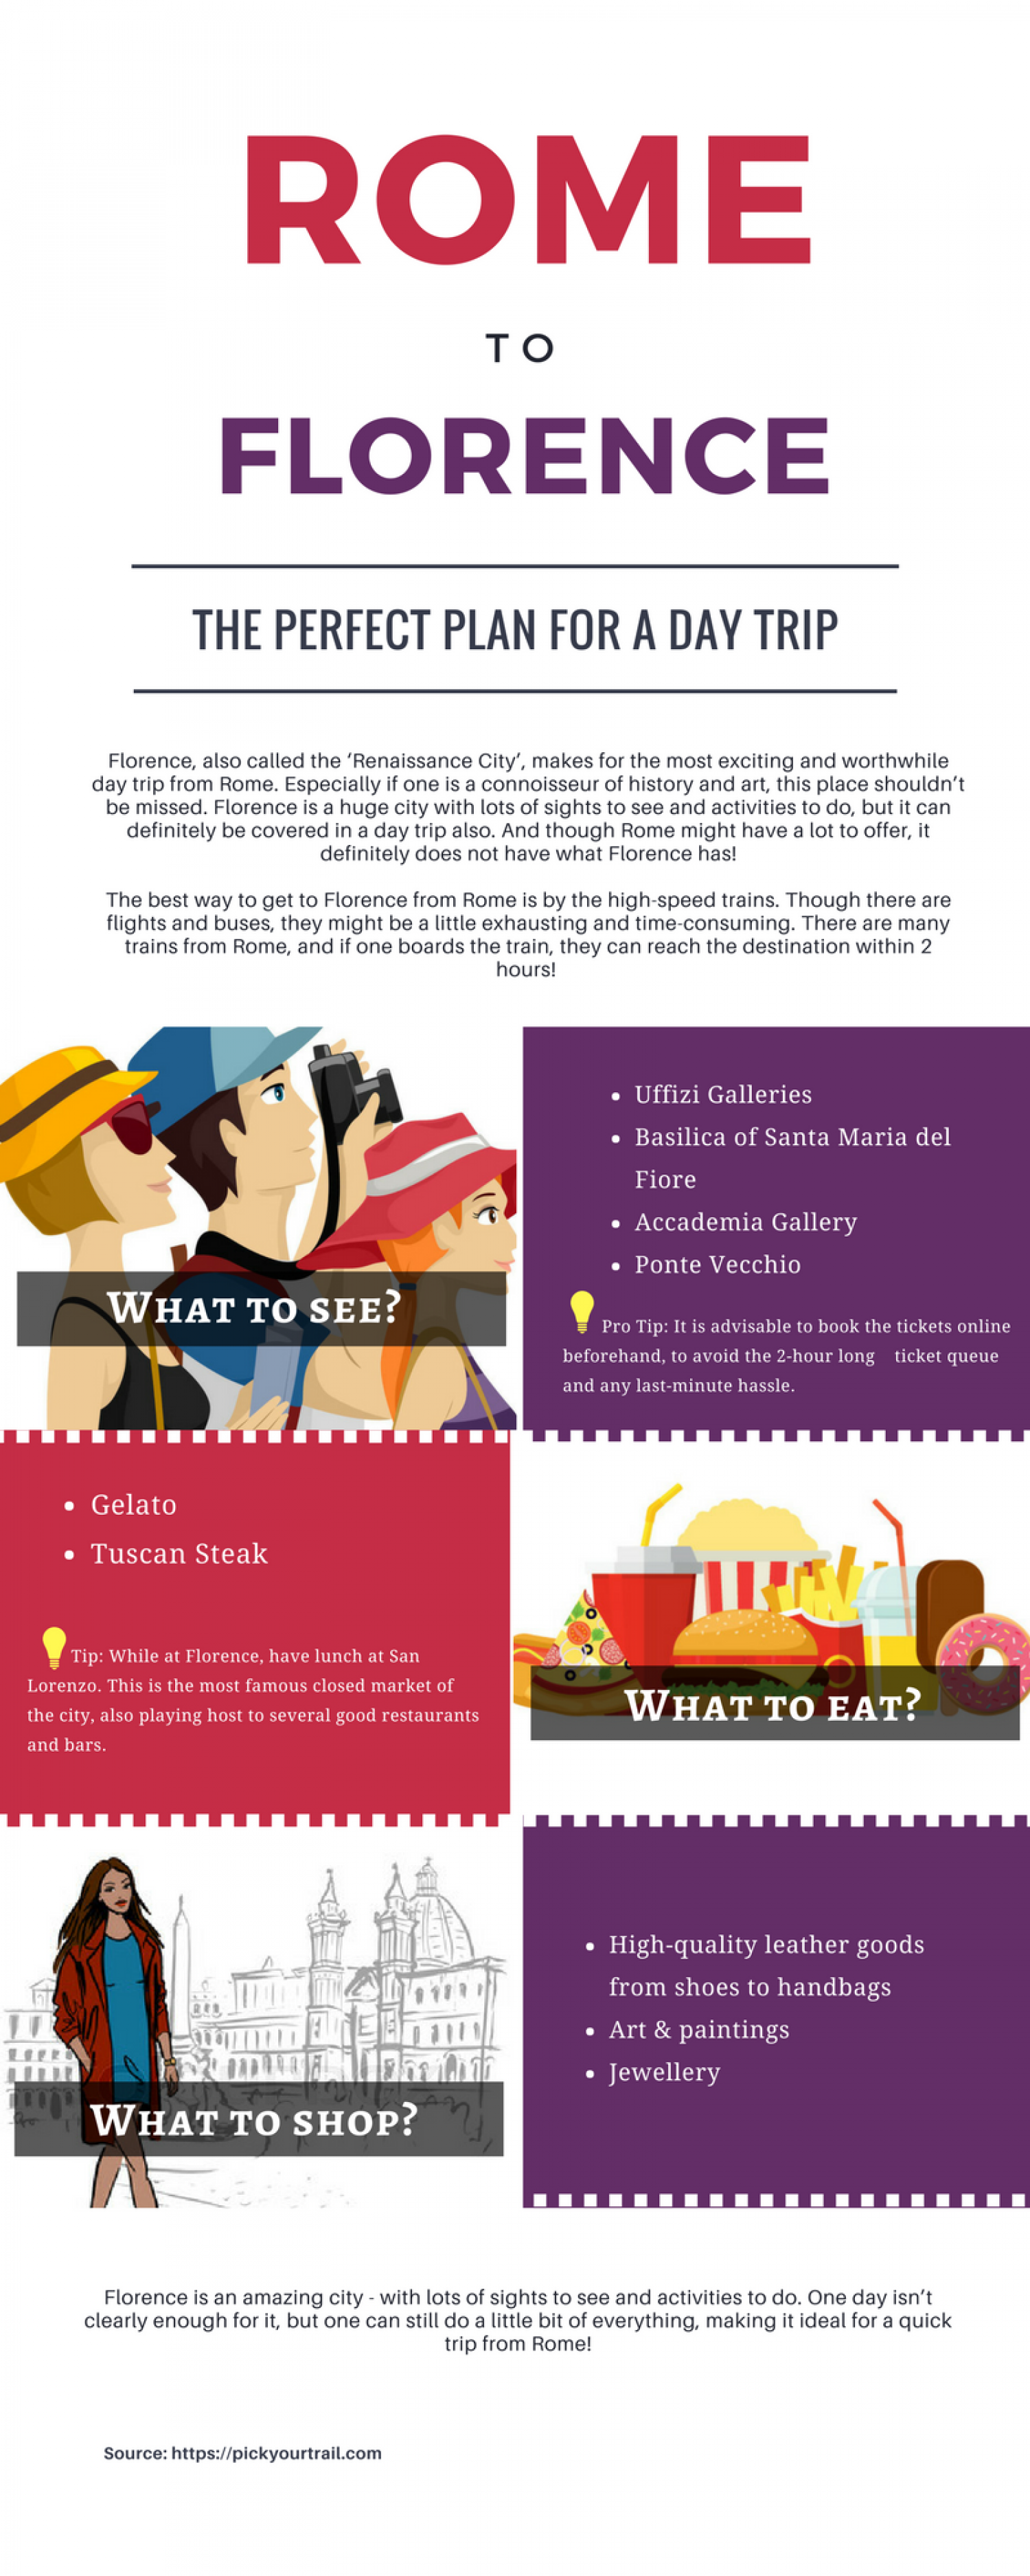 The perfect plan for a day trip from Rome to Florence! Infographic